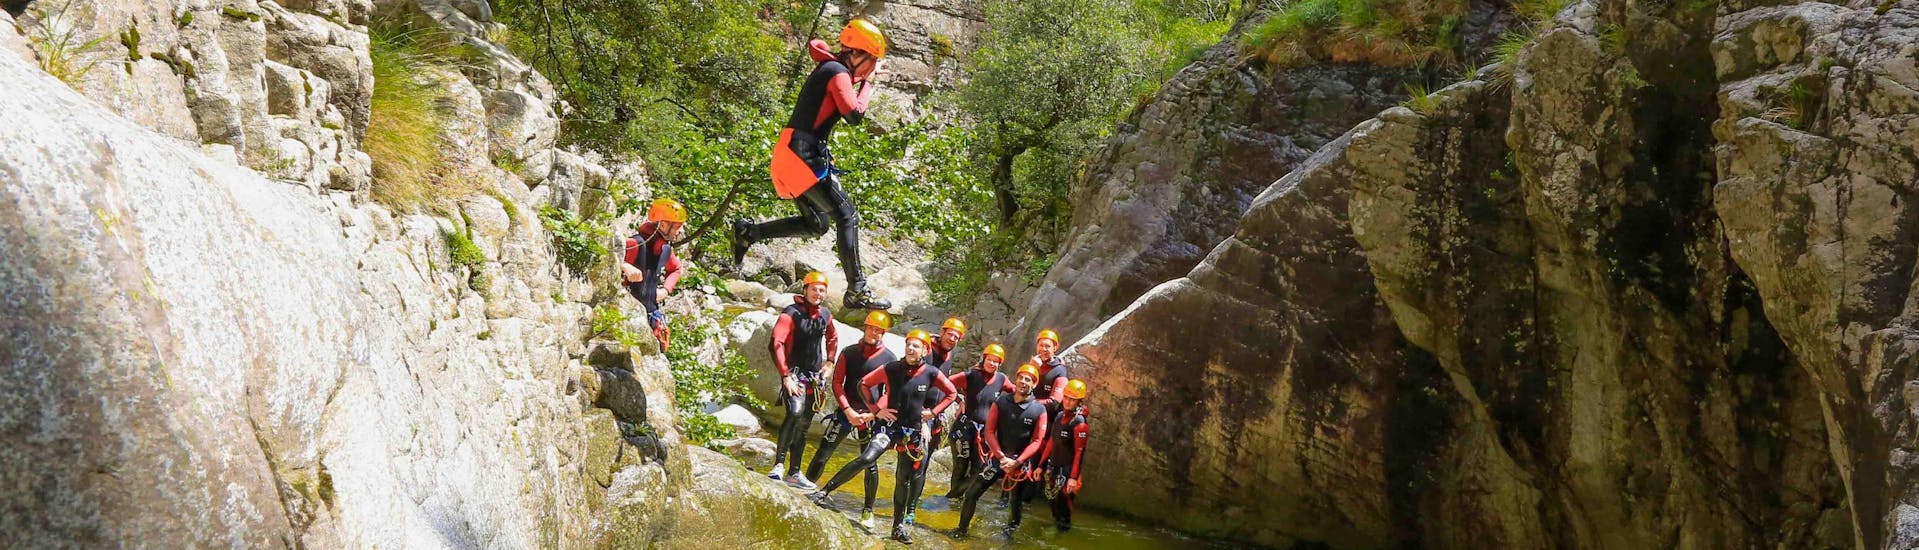 A father is jumping in the Richiusa canyon during his activity of canyoning for families with reves de cimes.